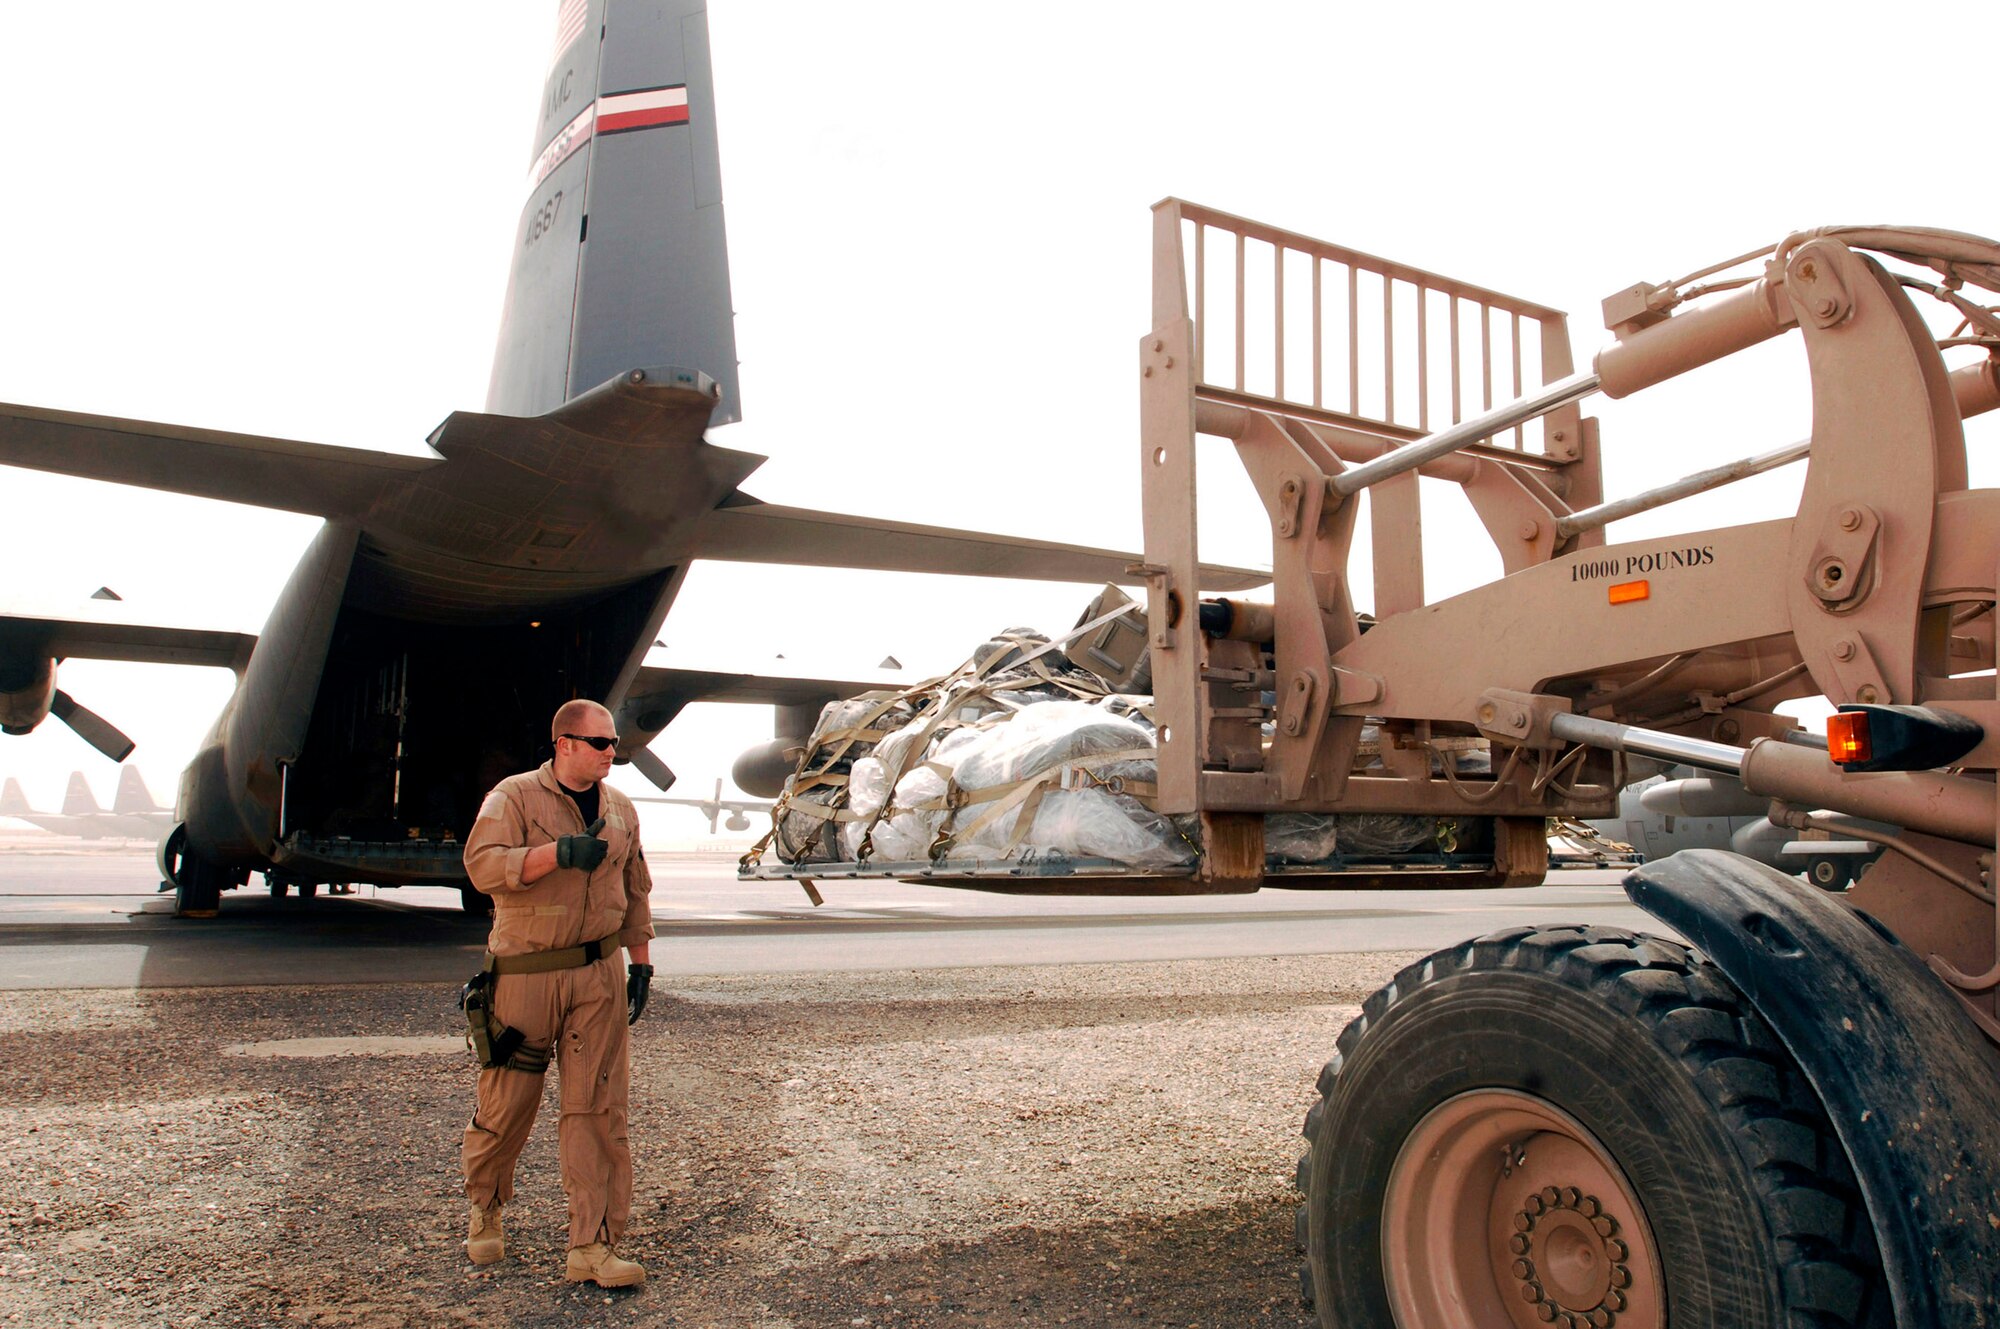 Senior Airman Ian Hunt marshals a 463L cargo pallet onto a C-130 Hercules at an air base in the Persian Gulf Region. The cargo pallet is bound for a base in Iraq. A part of his duties as loadmaster is to ensure cargo is loaded and unloaded in a safe manner and that it's secured to the aircraft, so it doesn't move during flight to bases throughout the theater. Airman Hunt is a C-130 loadmaster deployed with the 737th Expeditionary Airlift Squadron. (U.S. Air Force photo/Staff Sgt. Patrick Dixon)